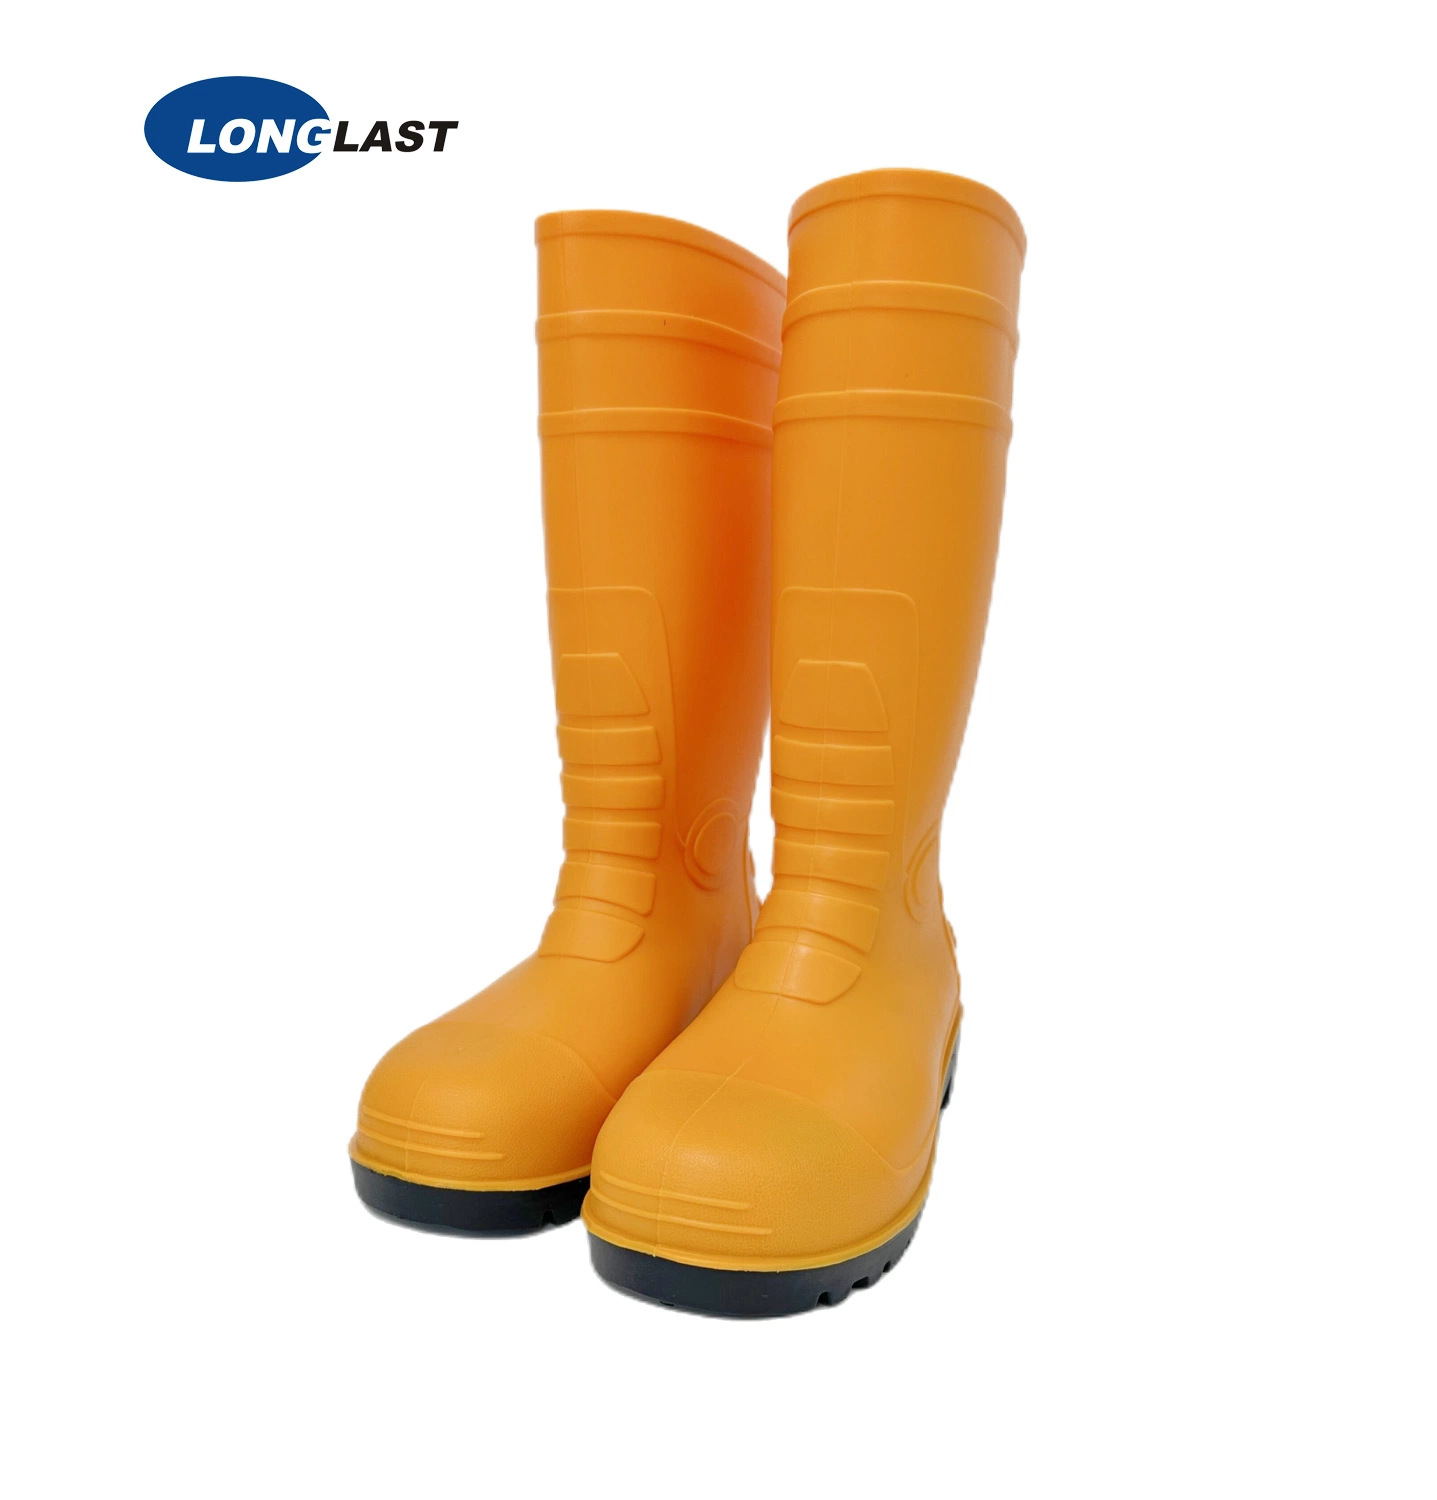 PVC Safety Boots with Slip Resistant